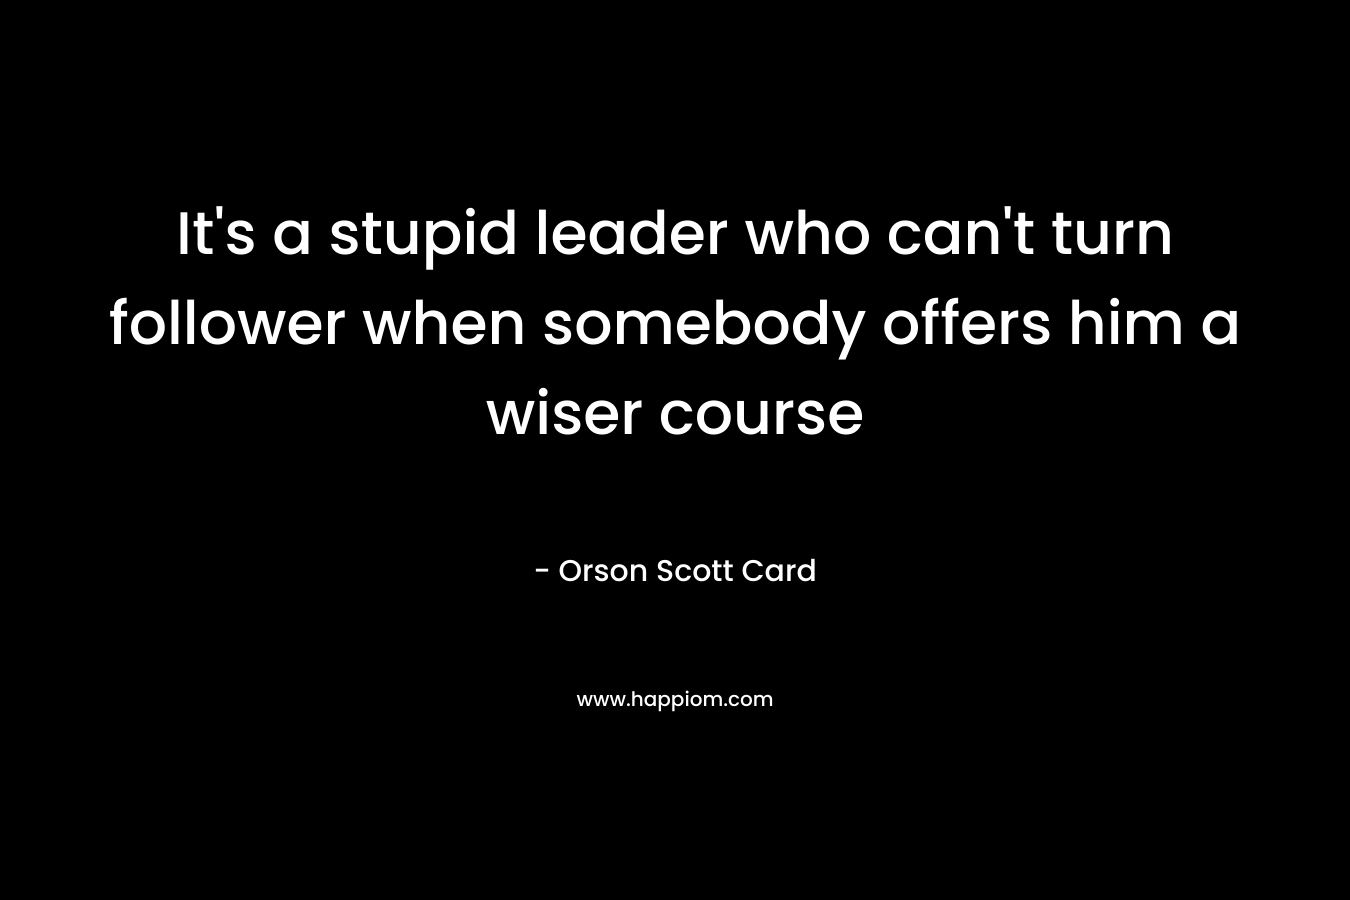 It’s a stupid leader who can’t turn follower when somebody offers him a wiser course – Orson Scott Card